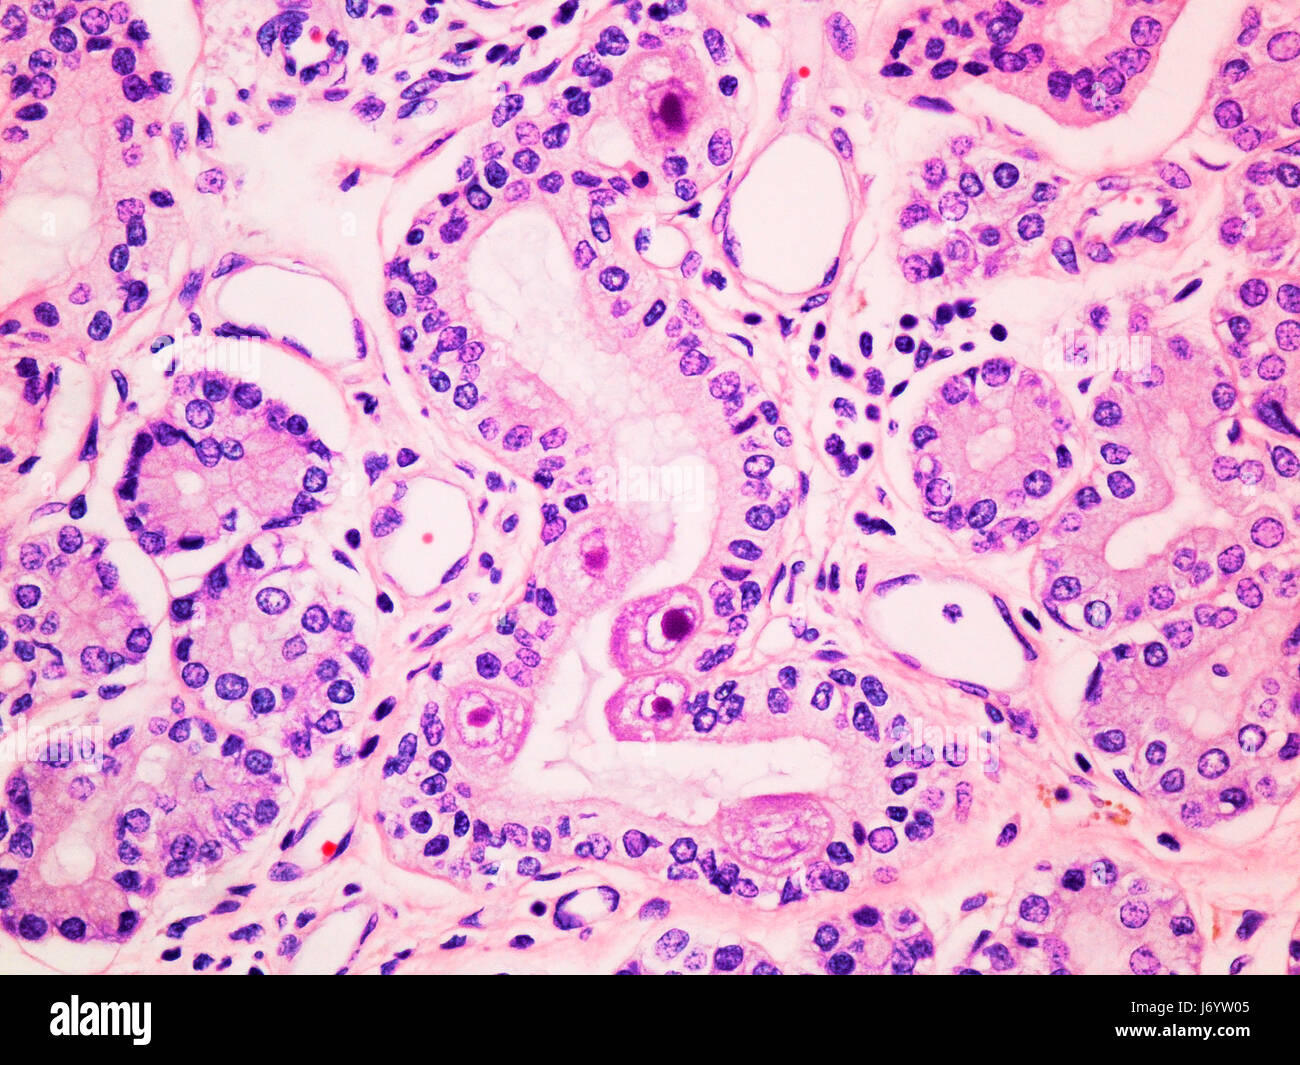 Cytomegalovirus CMV Infection in the Salivary Gland Viewed at 400x Magnification with Haemotoxylin and Eosin Staining. Stock Photo